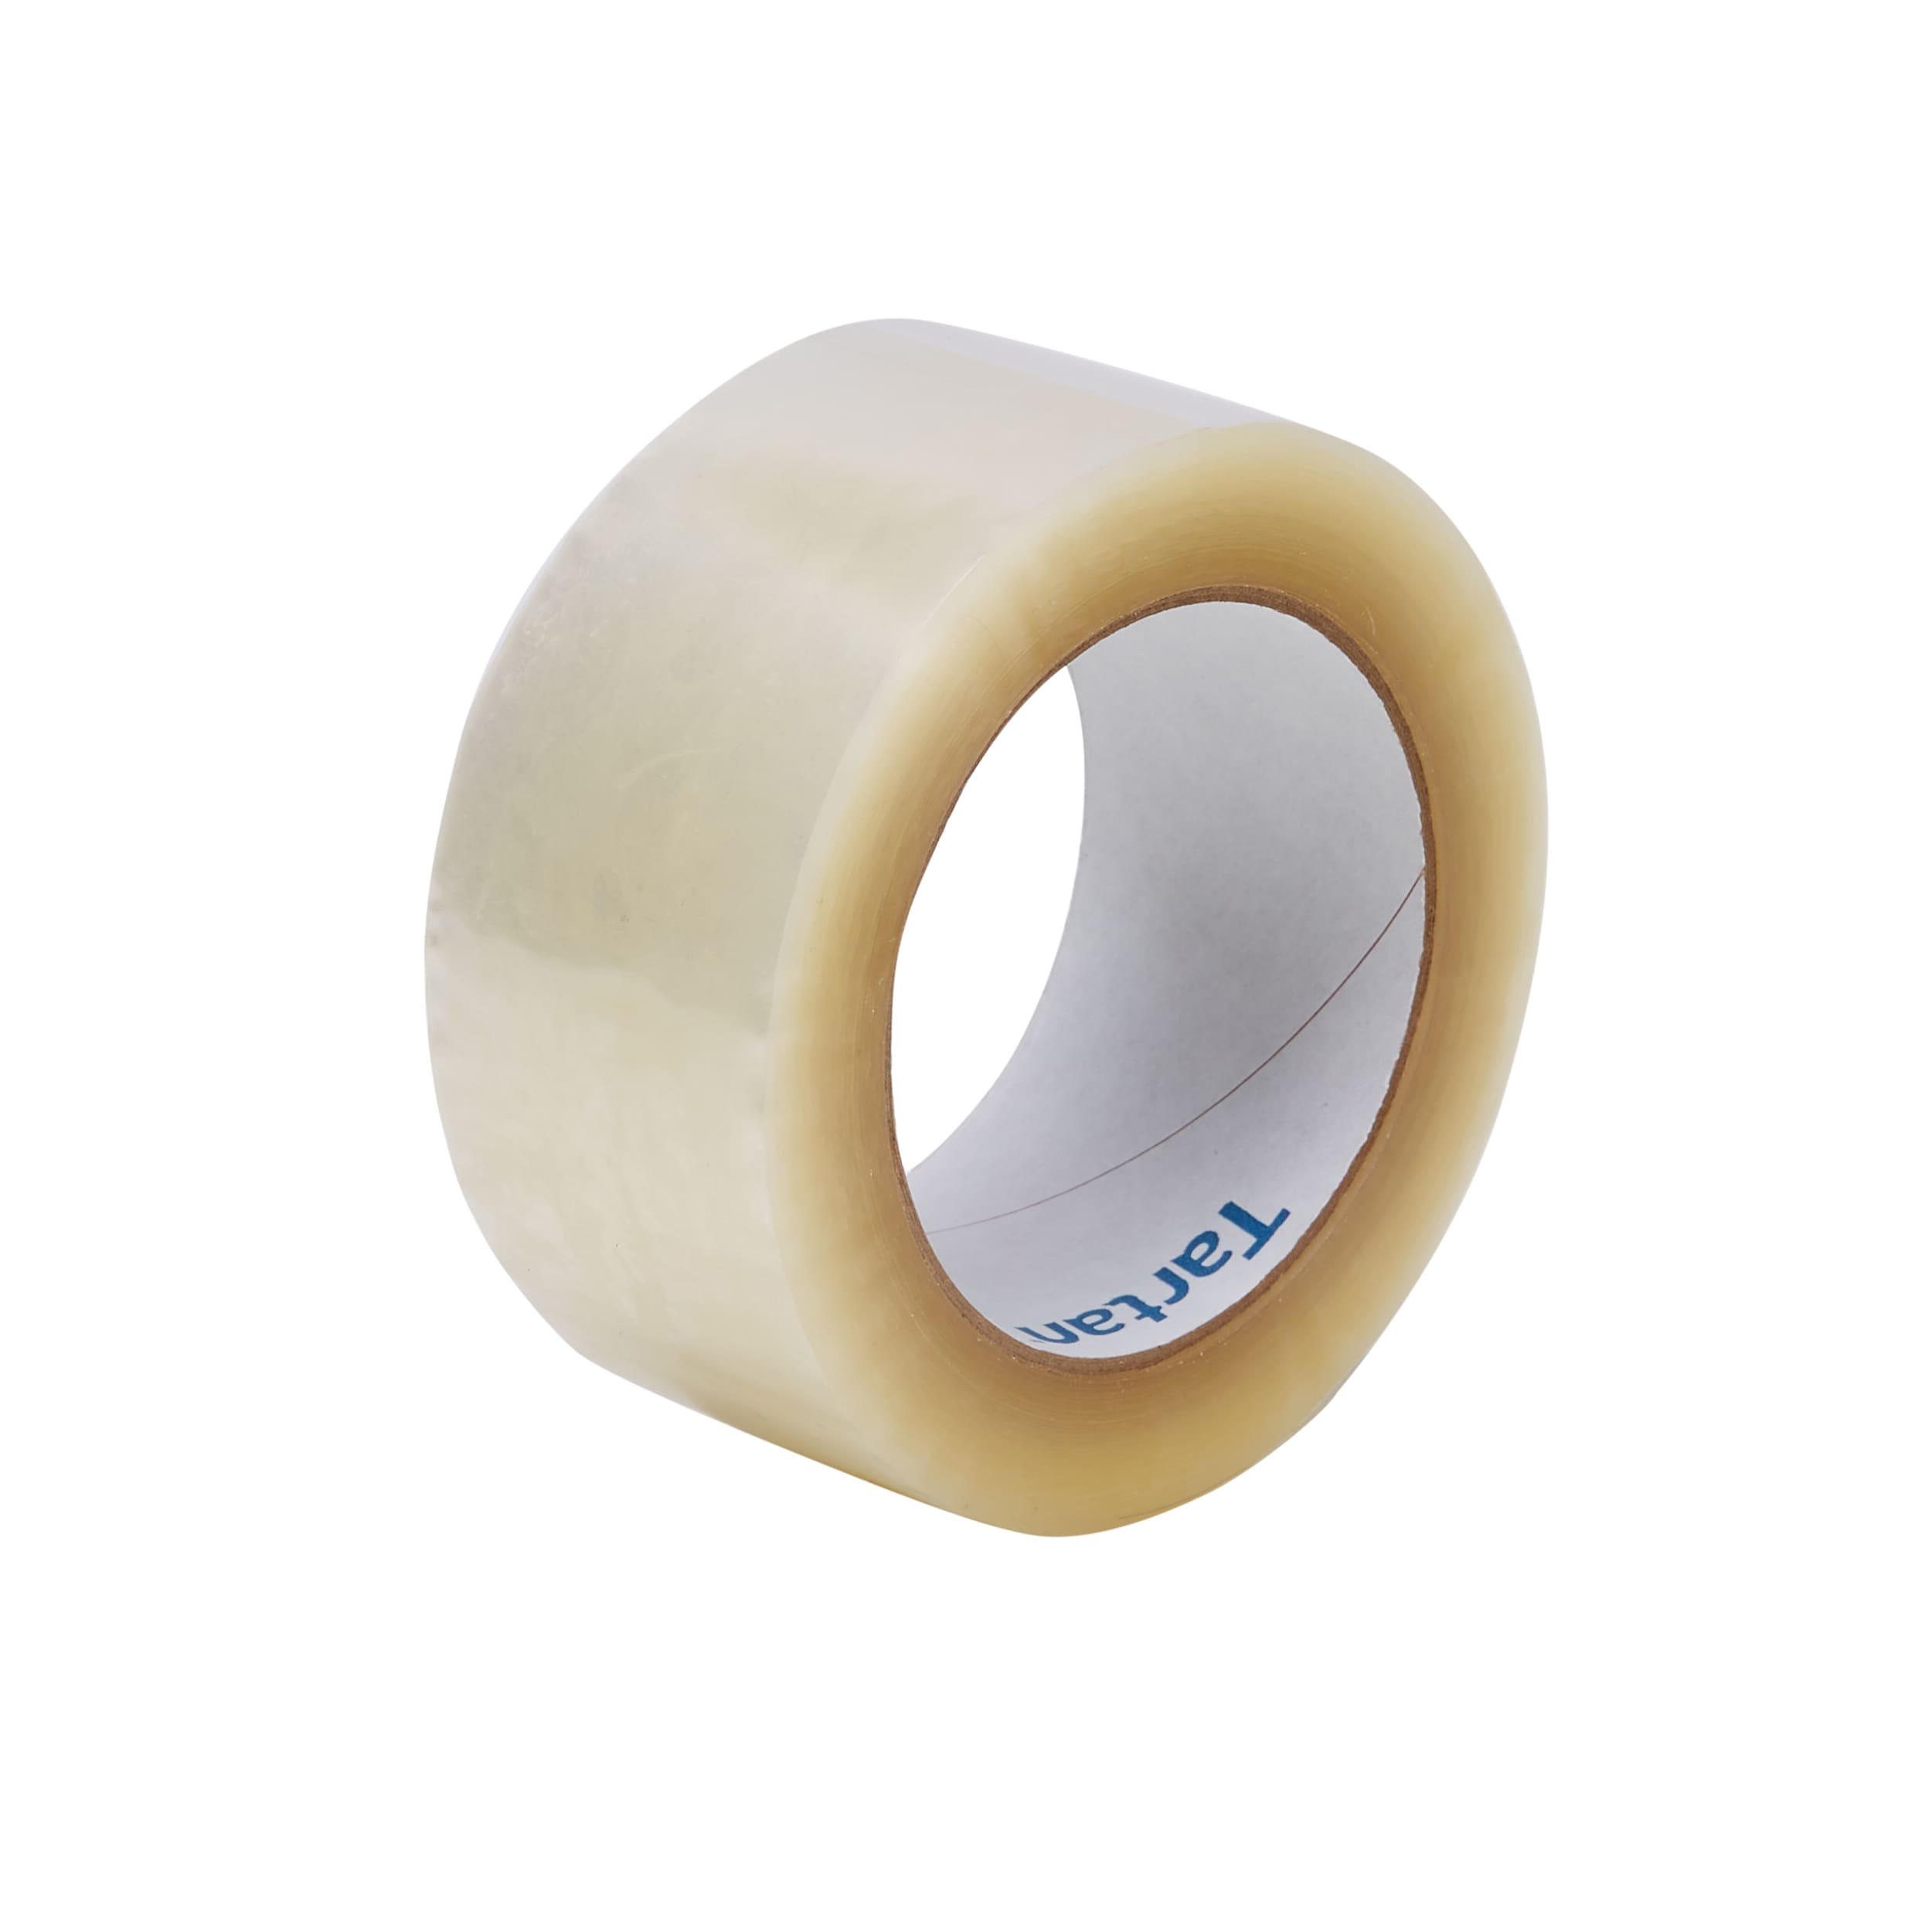 High Quality Masking Tape - PadNProtect 6-Roll Pack Masking Tape ($4.67/roll)